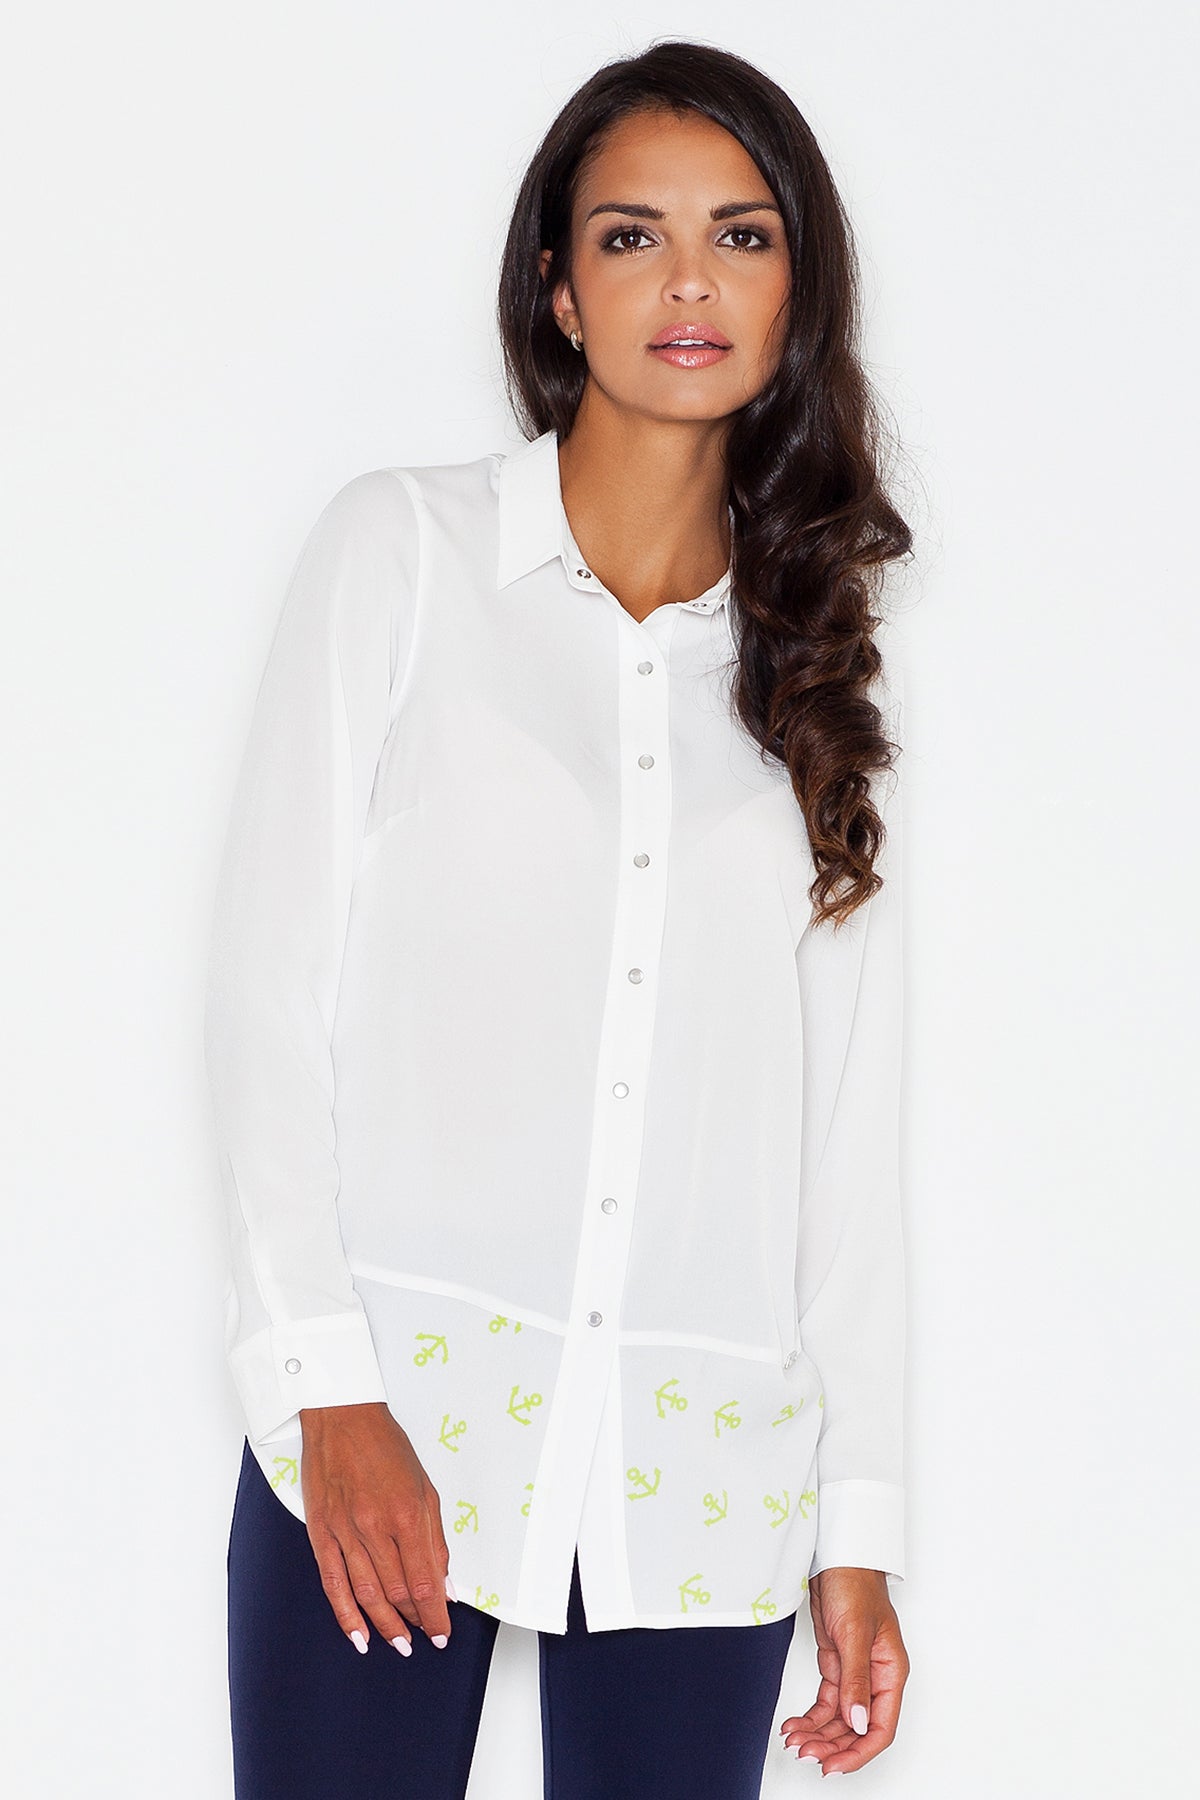 Shirt model 43747 Elsy Style Shirts for Women